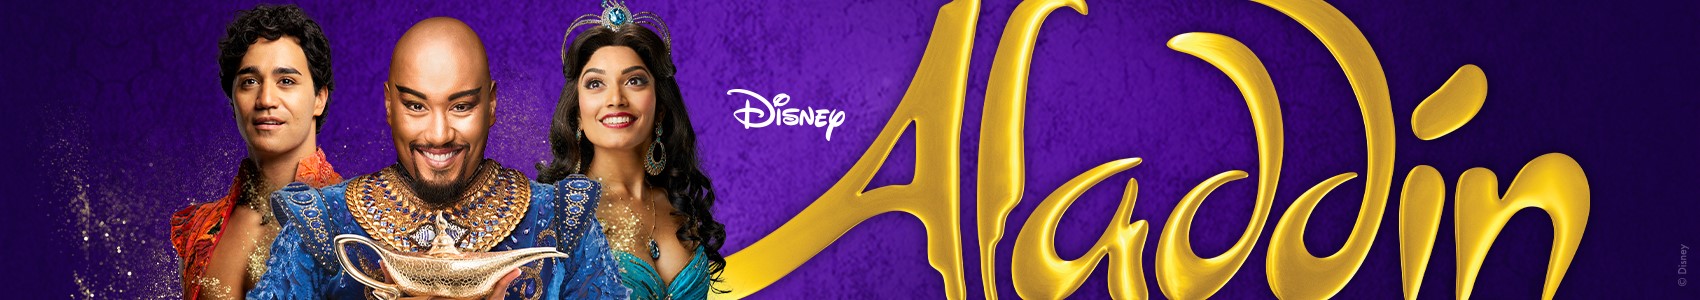 Know before you go: Disney's Aladdin The Musical